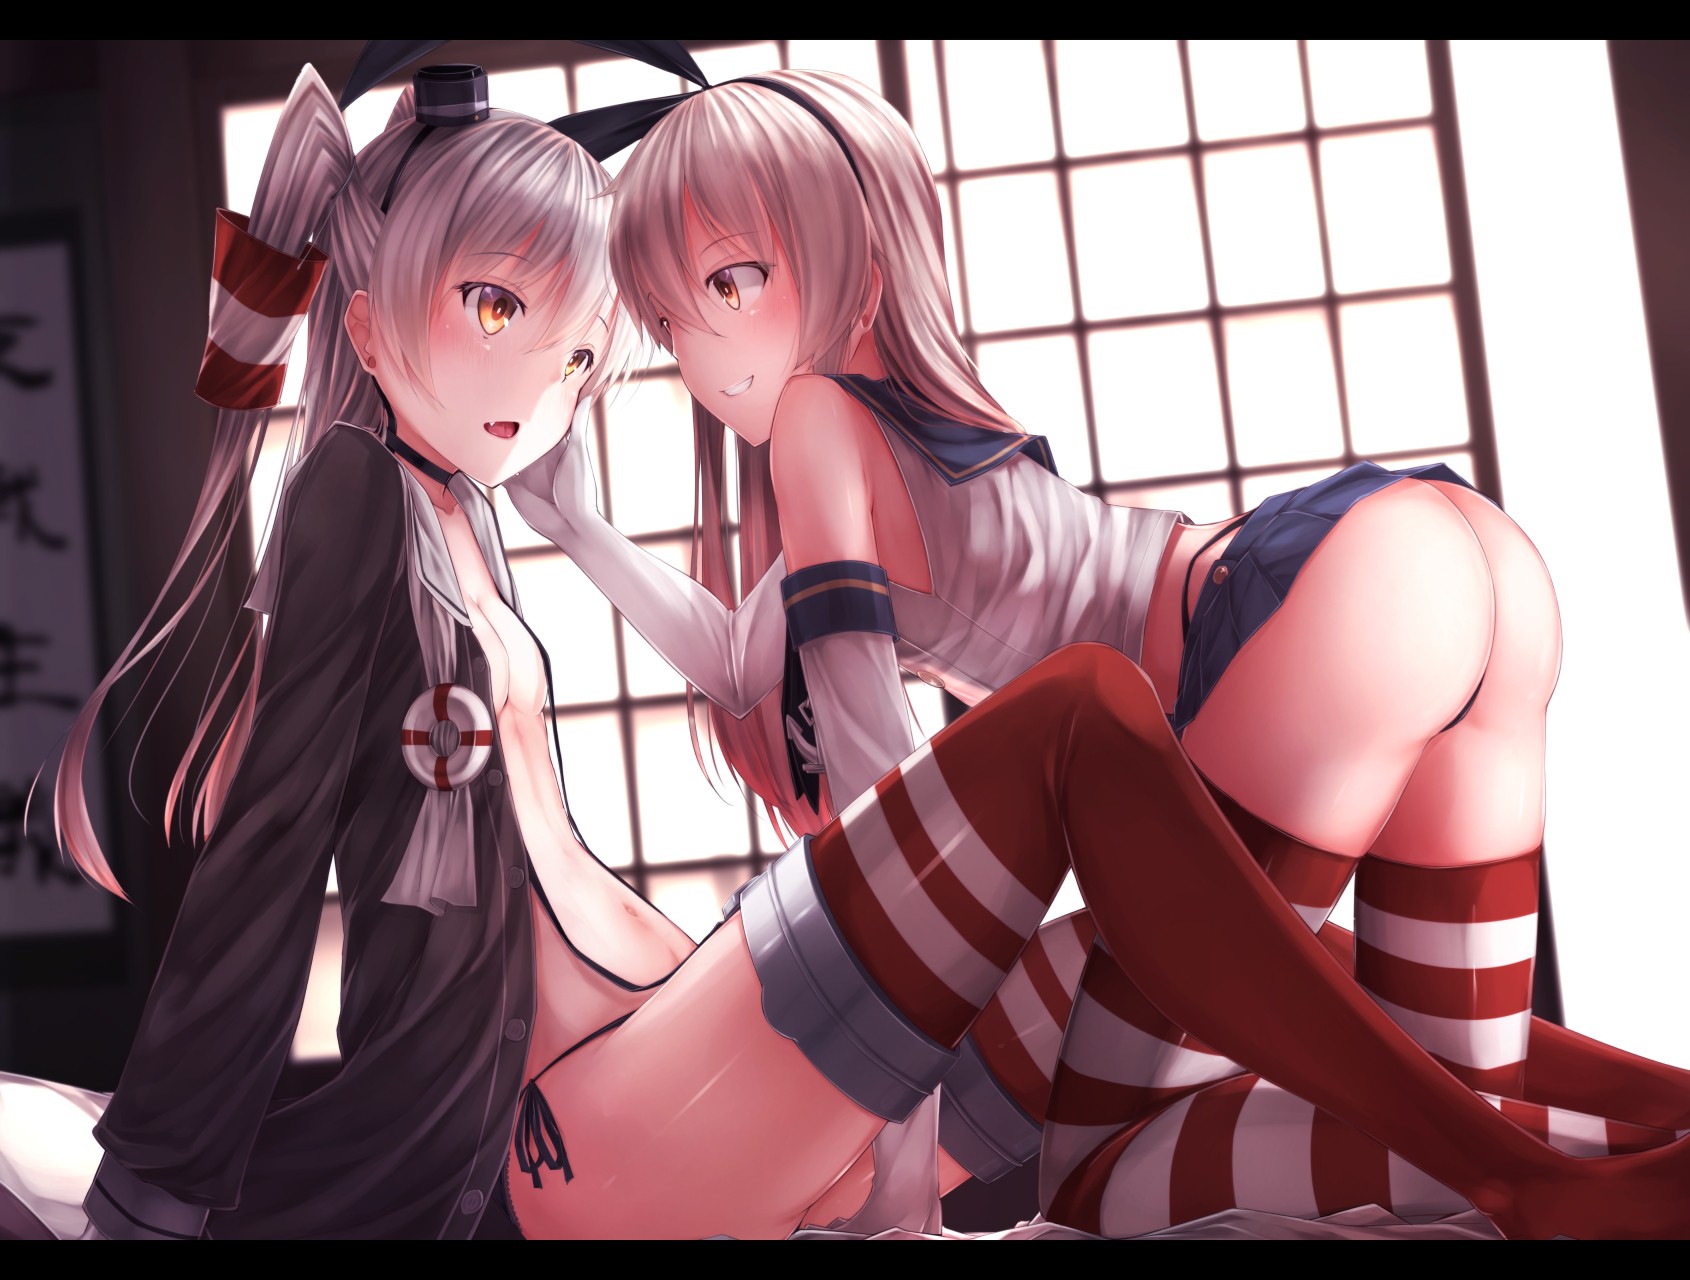 Anime 1690x1280 anime anime girls Kantai Collection ass long hair gray hair orange eyes legs two women lesbians rear view boobs small boobs yellow eyes bunny ears striped stockings stockings belly sitting bent over women indoors